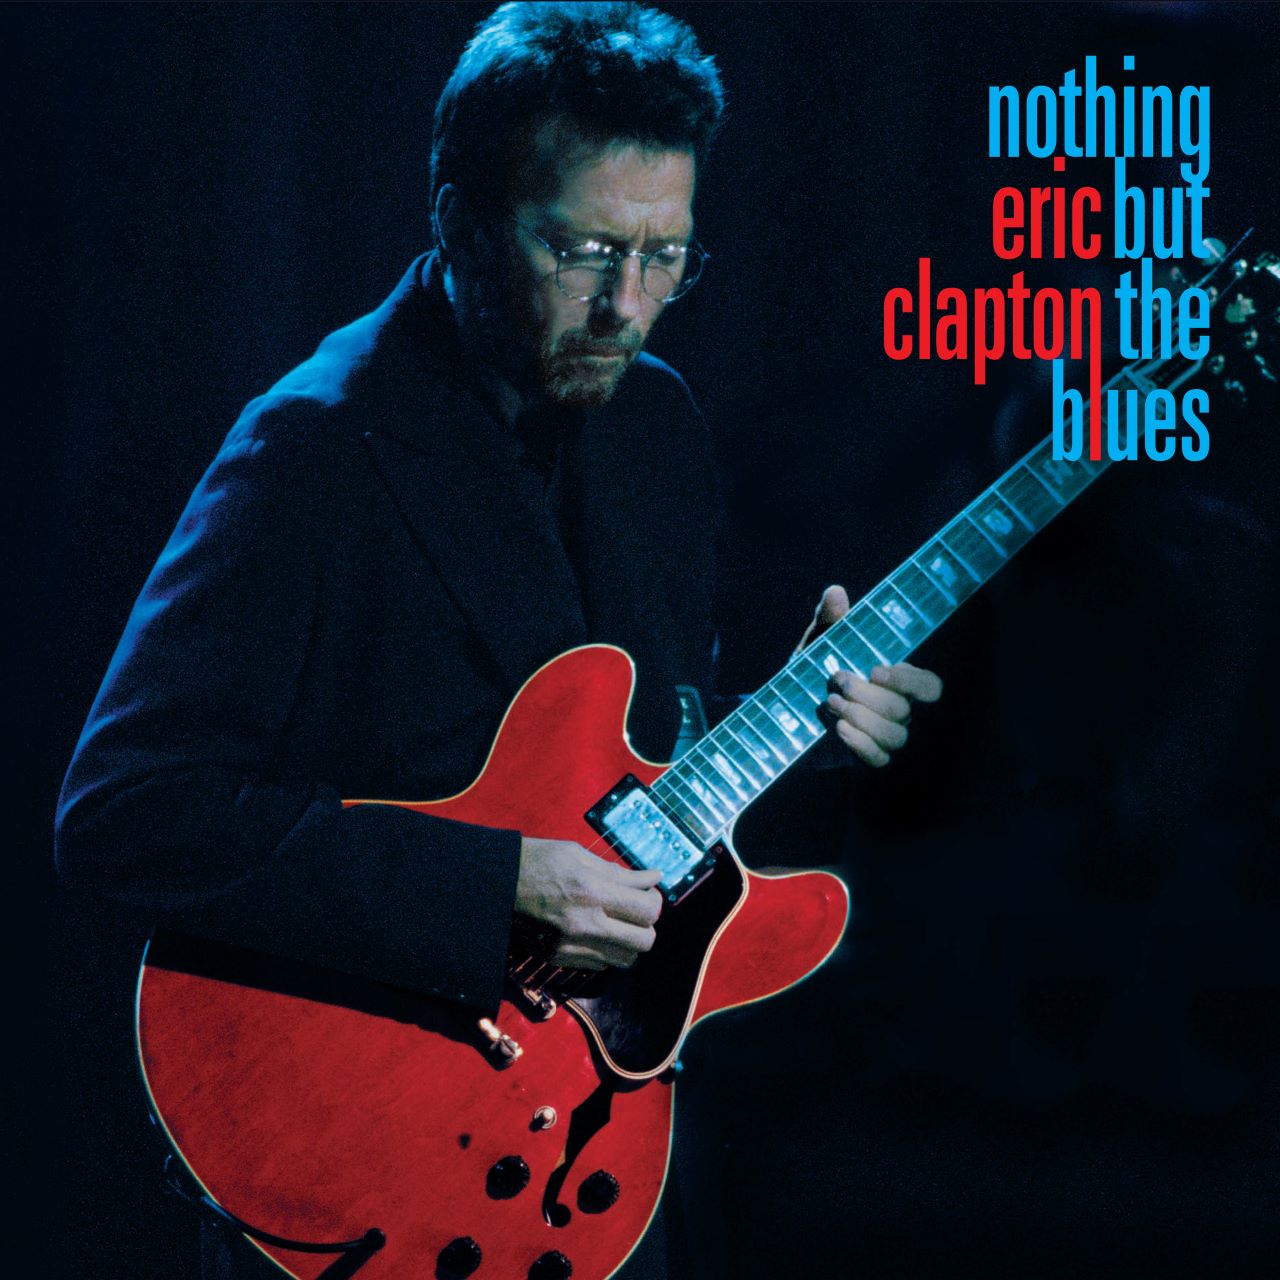 Eric Clapton - Nothing But The Blues cover album